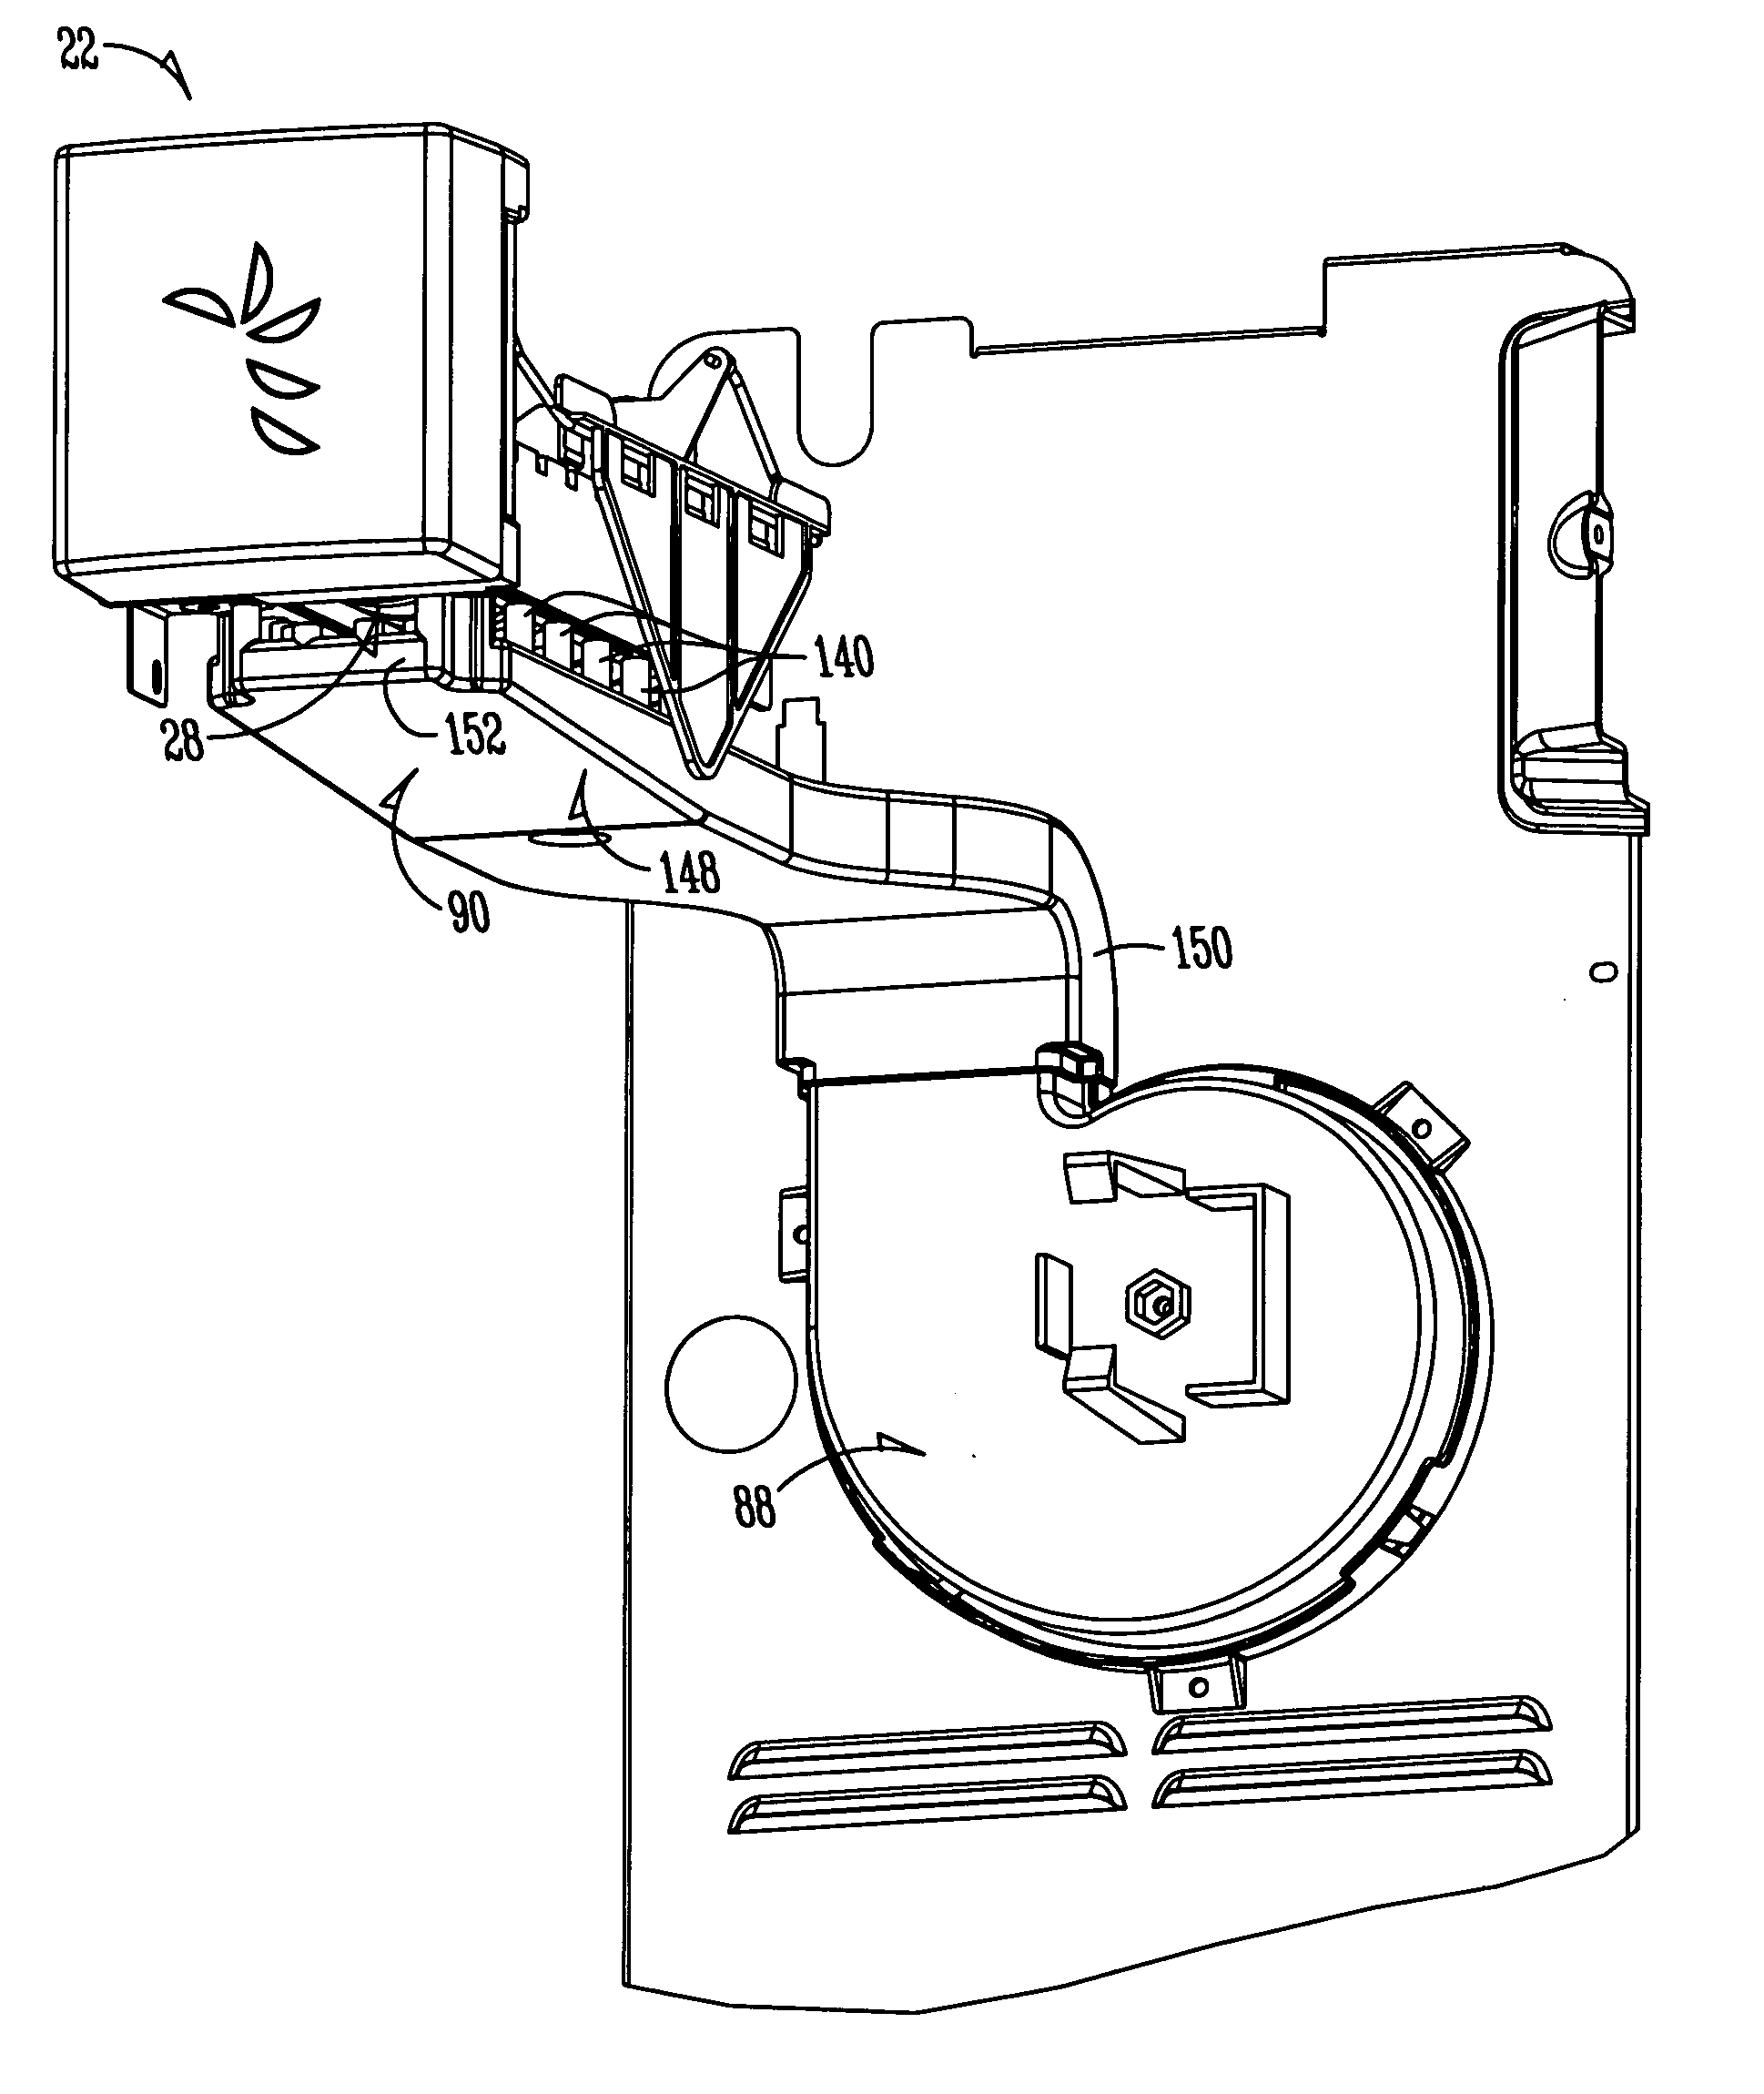 Refrigerator with improved icemaker